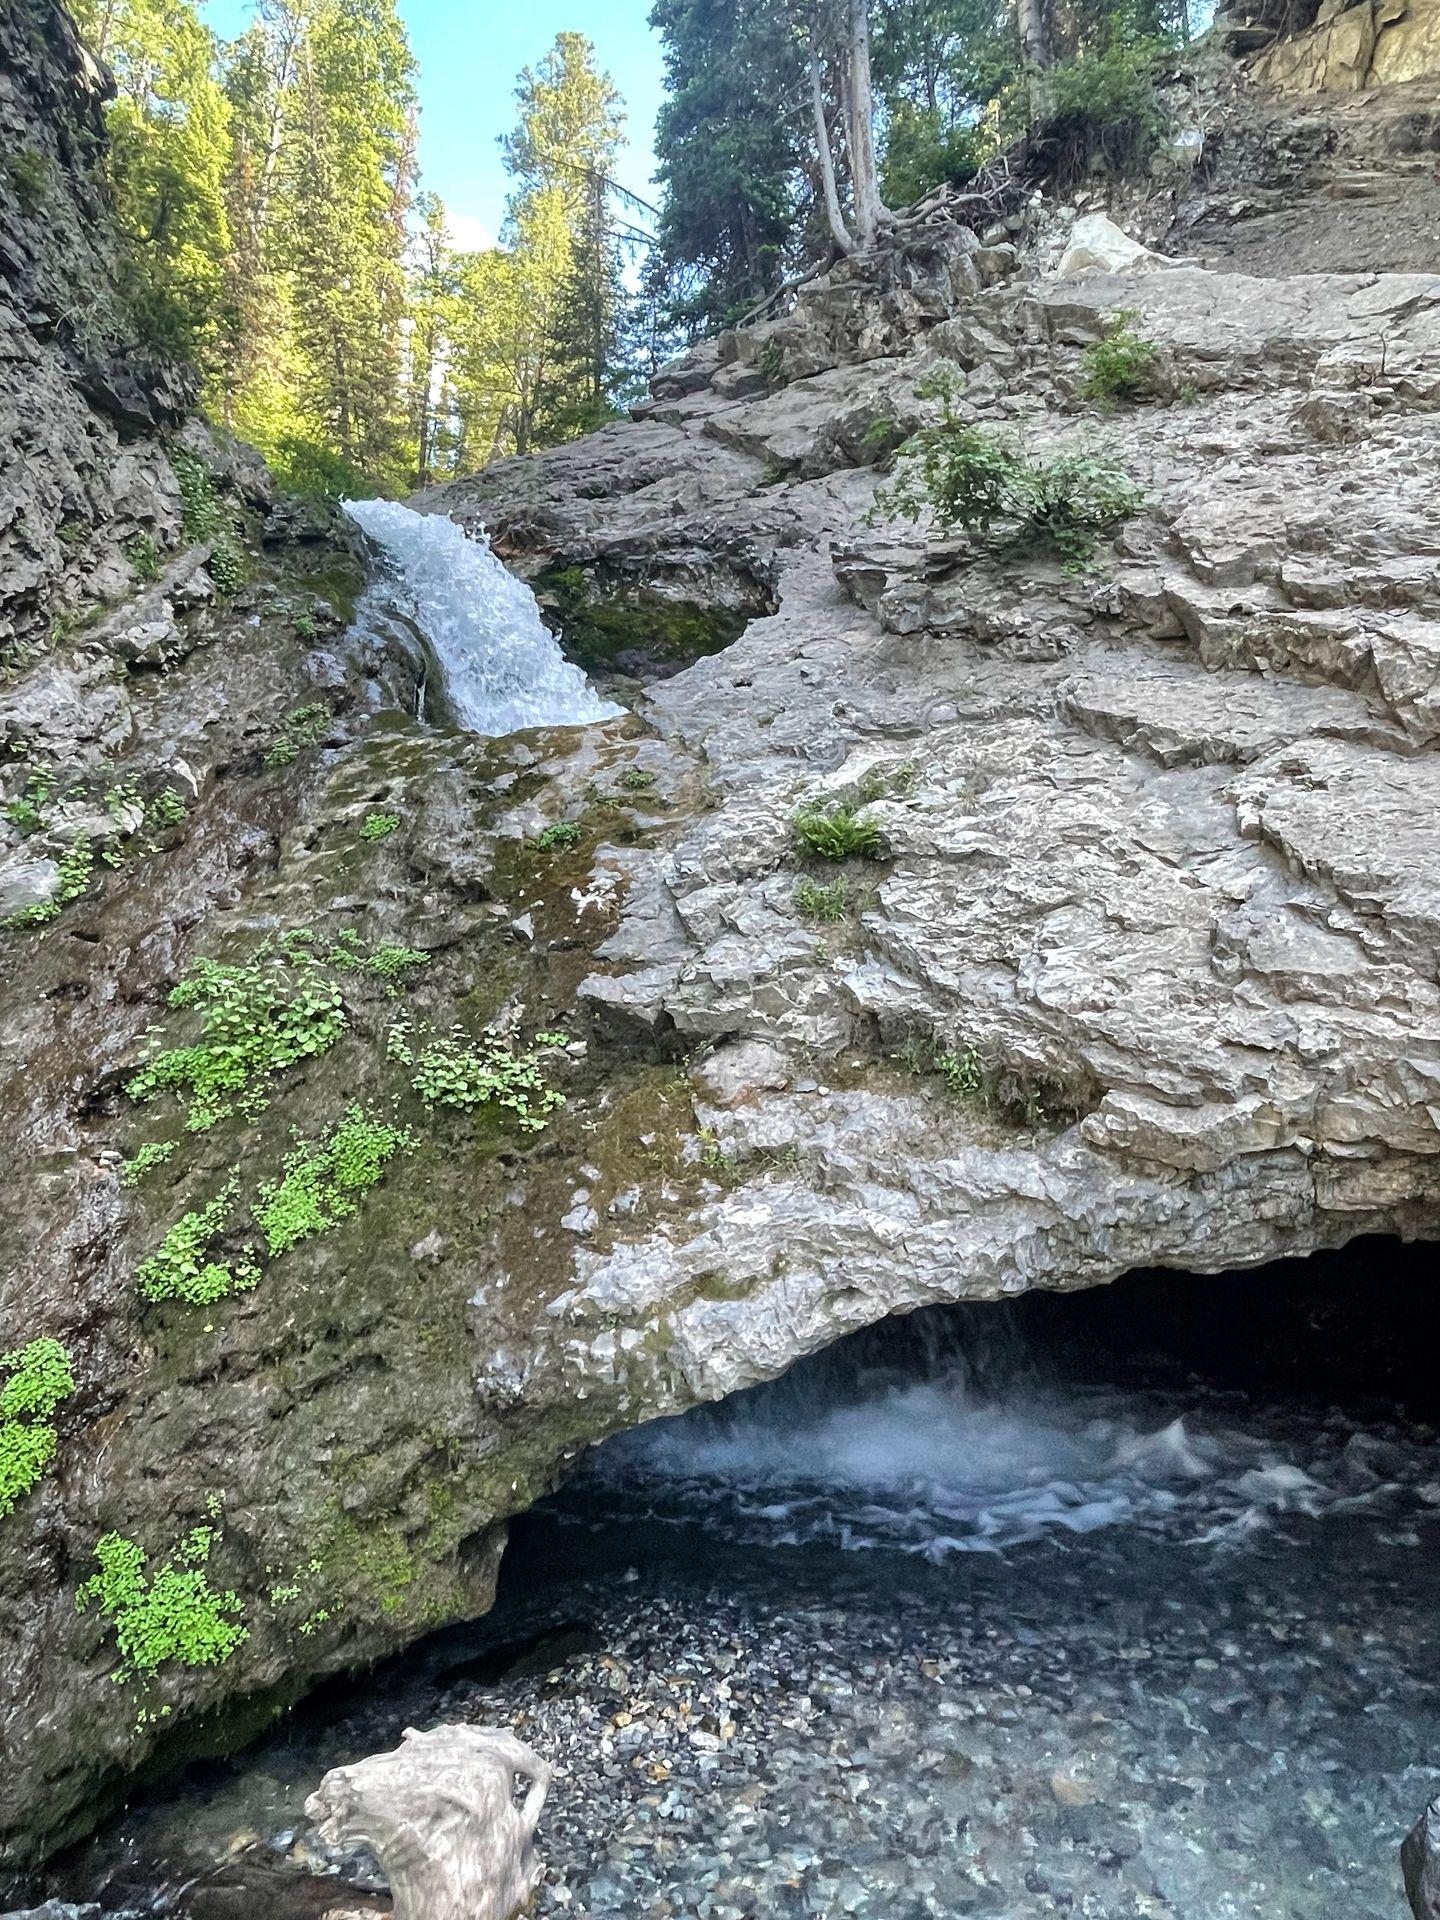 A waterfall flowing through a hole in the rocks at Donut Falls.